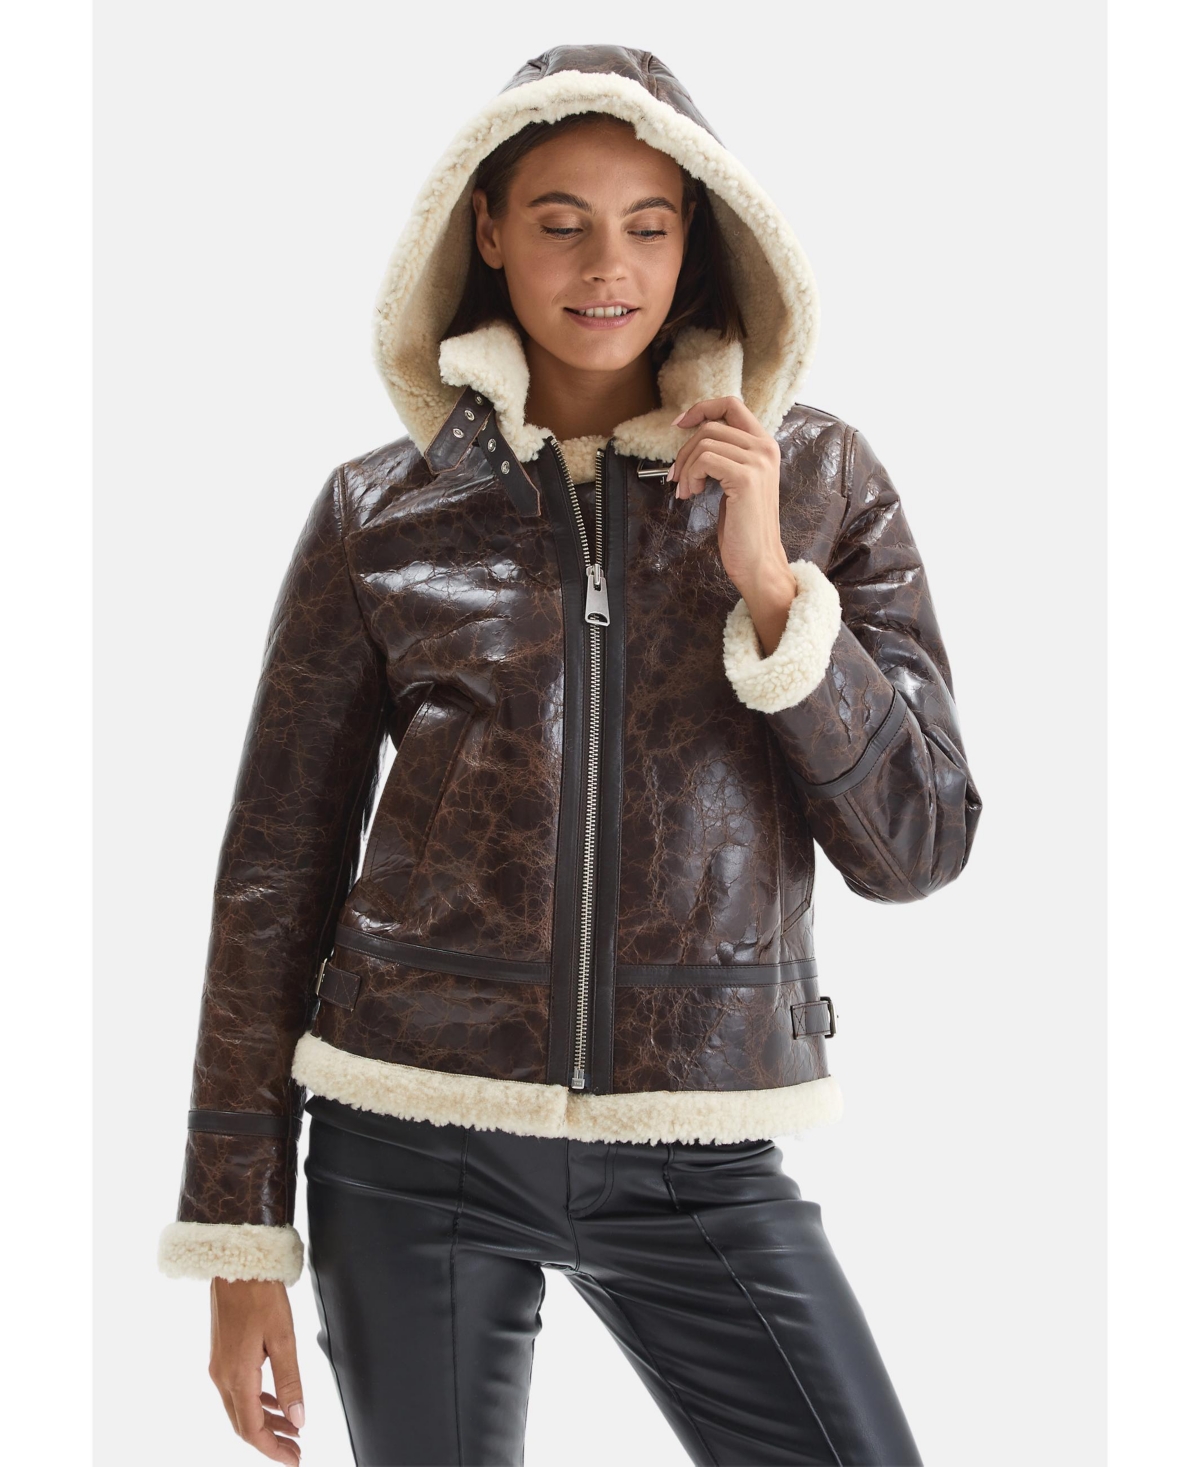 Women's Detachable Hooded Shearling Jacket, Cracked Brown with Beige Curly Wool - Brown